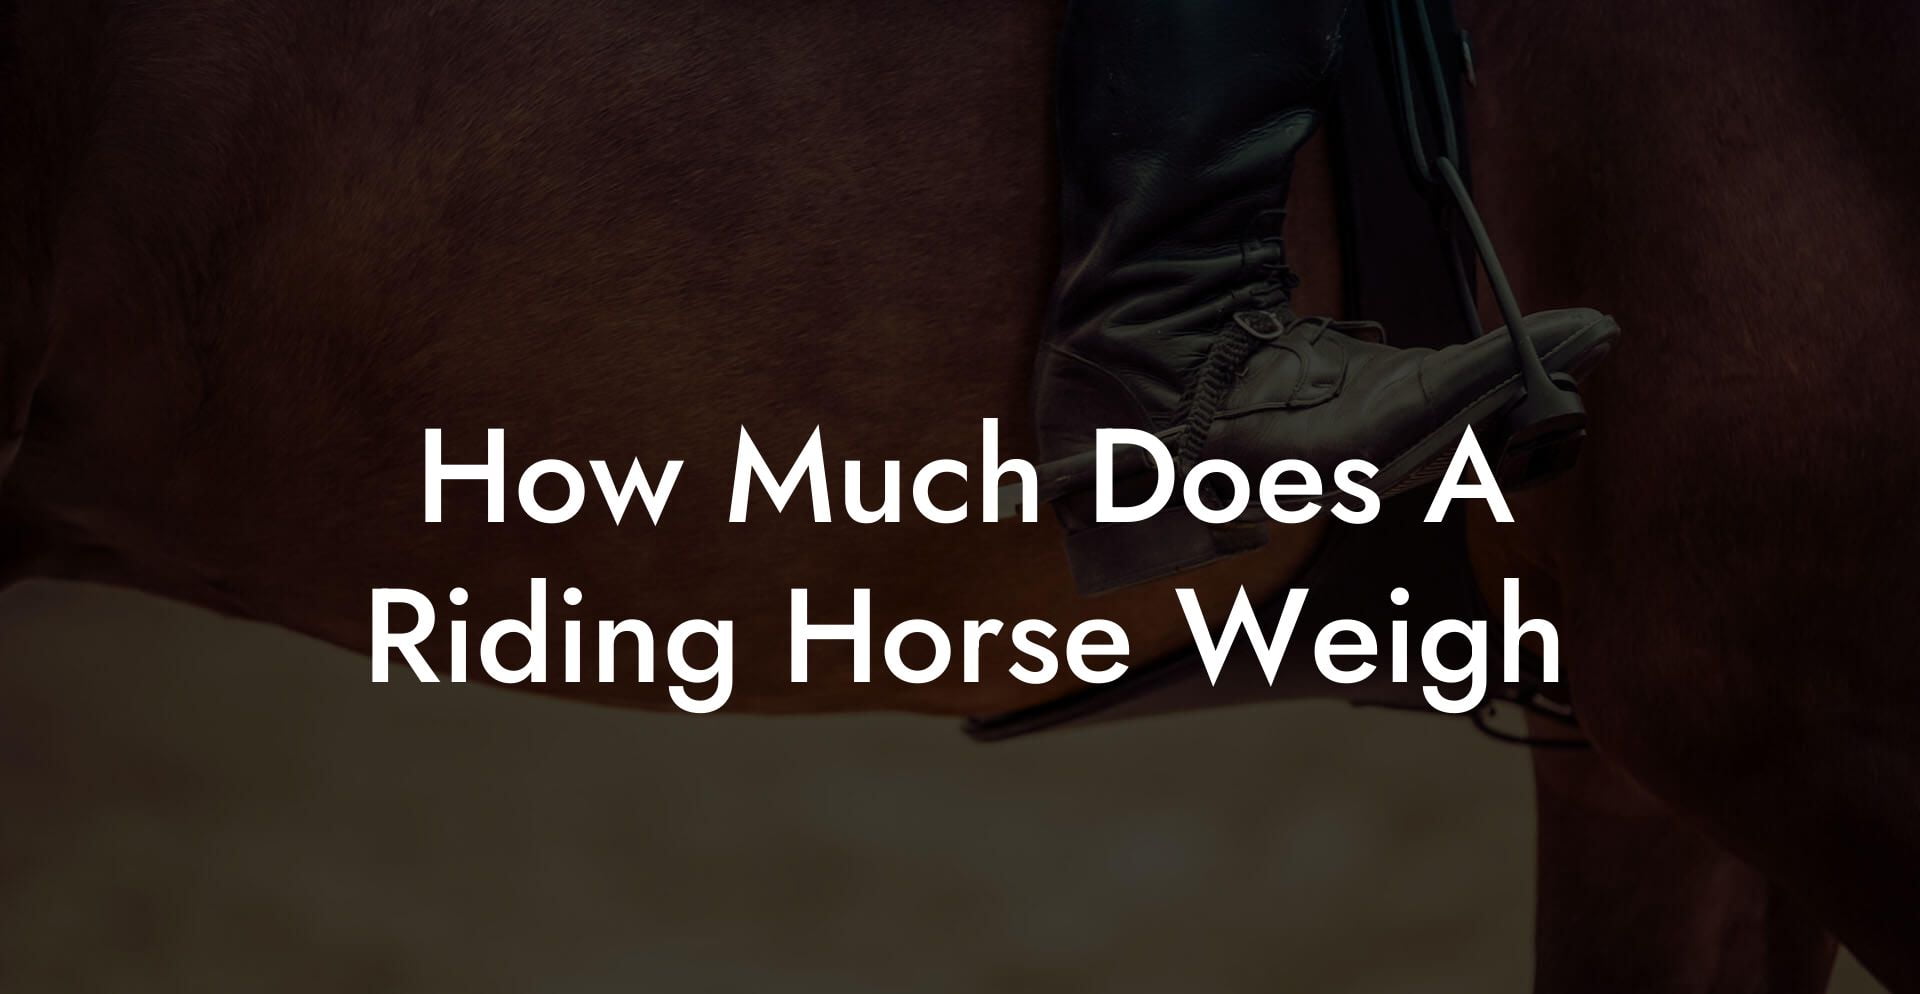 How Much Does A Riding Horse Weigh